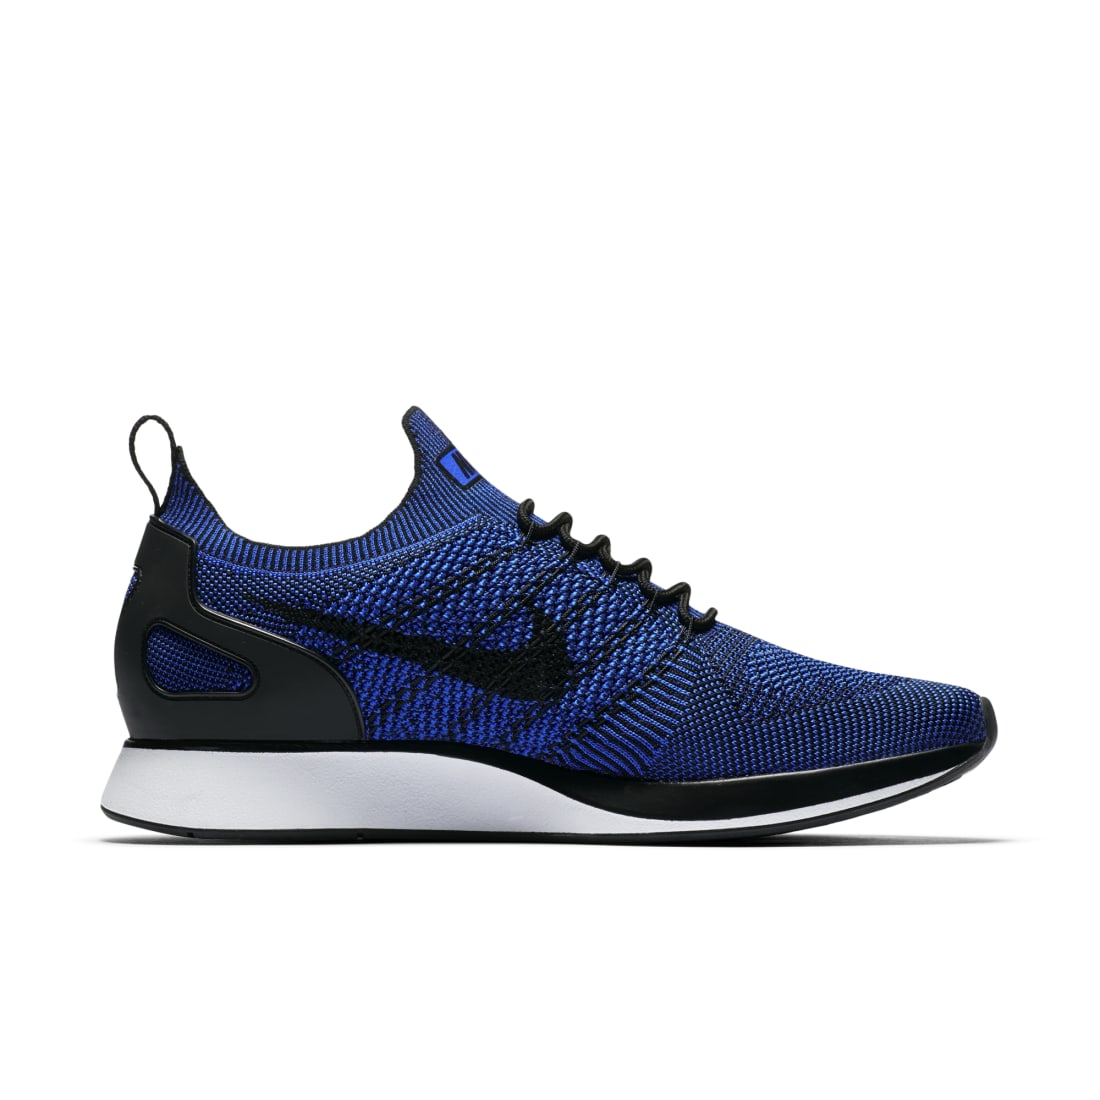 Nike Flyknit Racer Blue | Nike | Dates, Sneaker Calendar, Prices & Collaborations